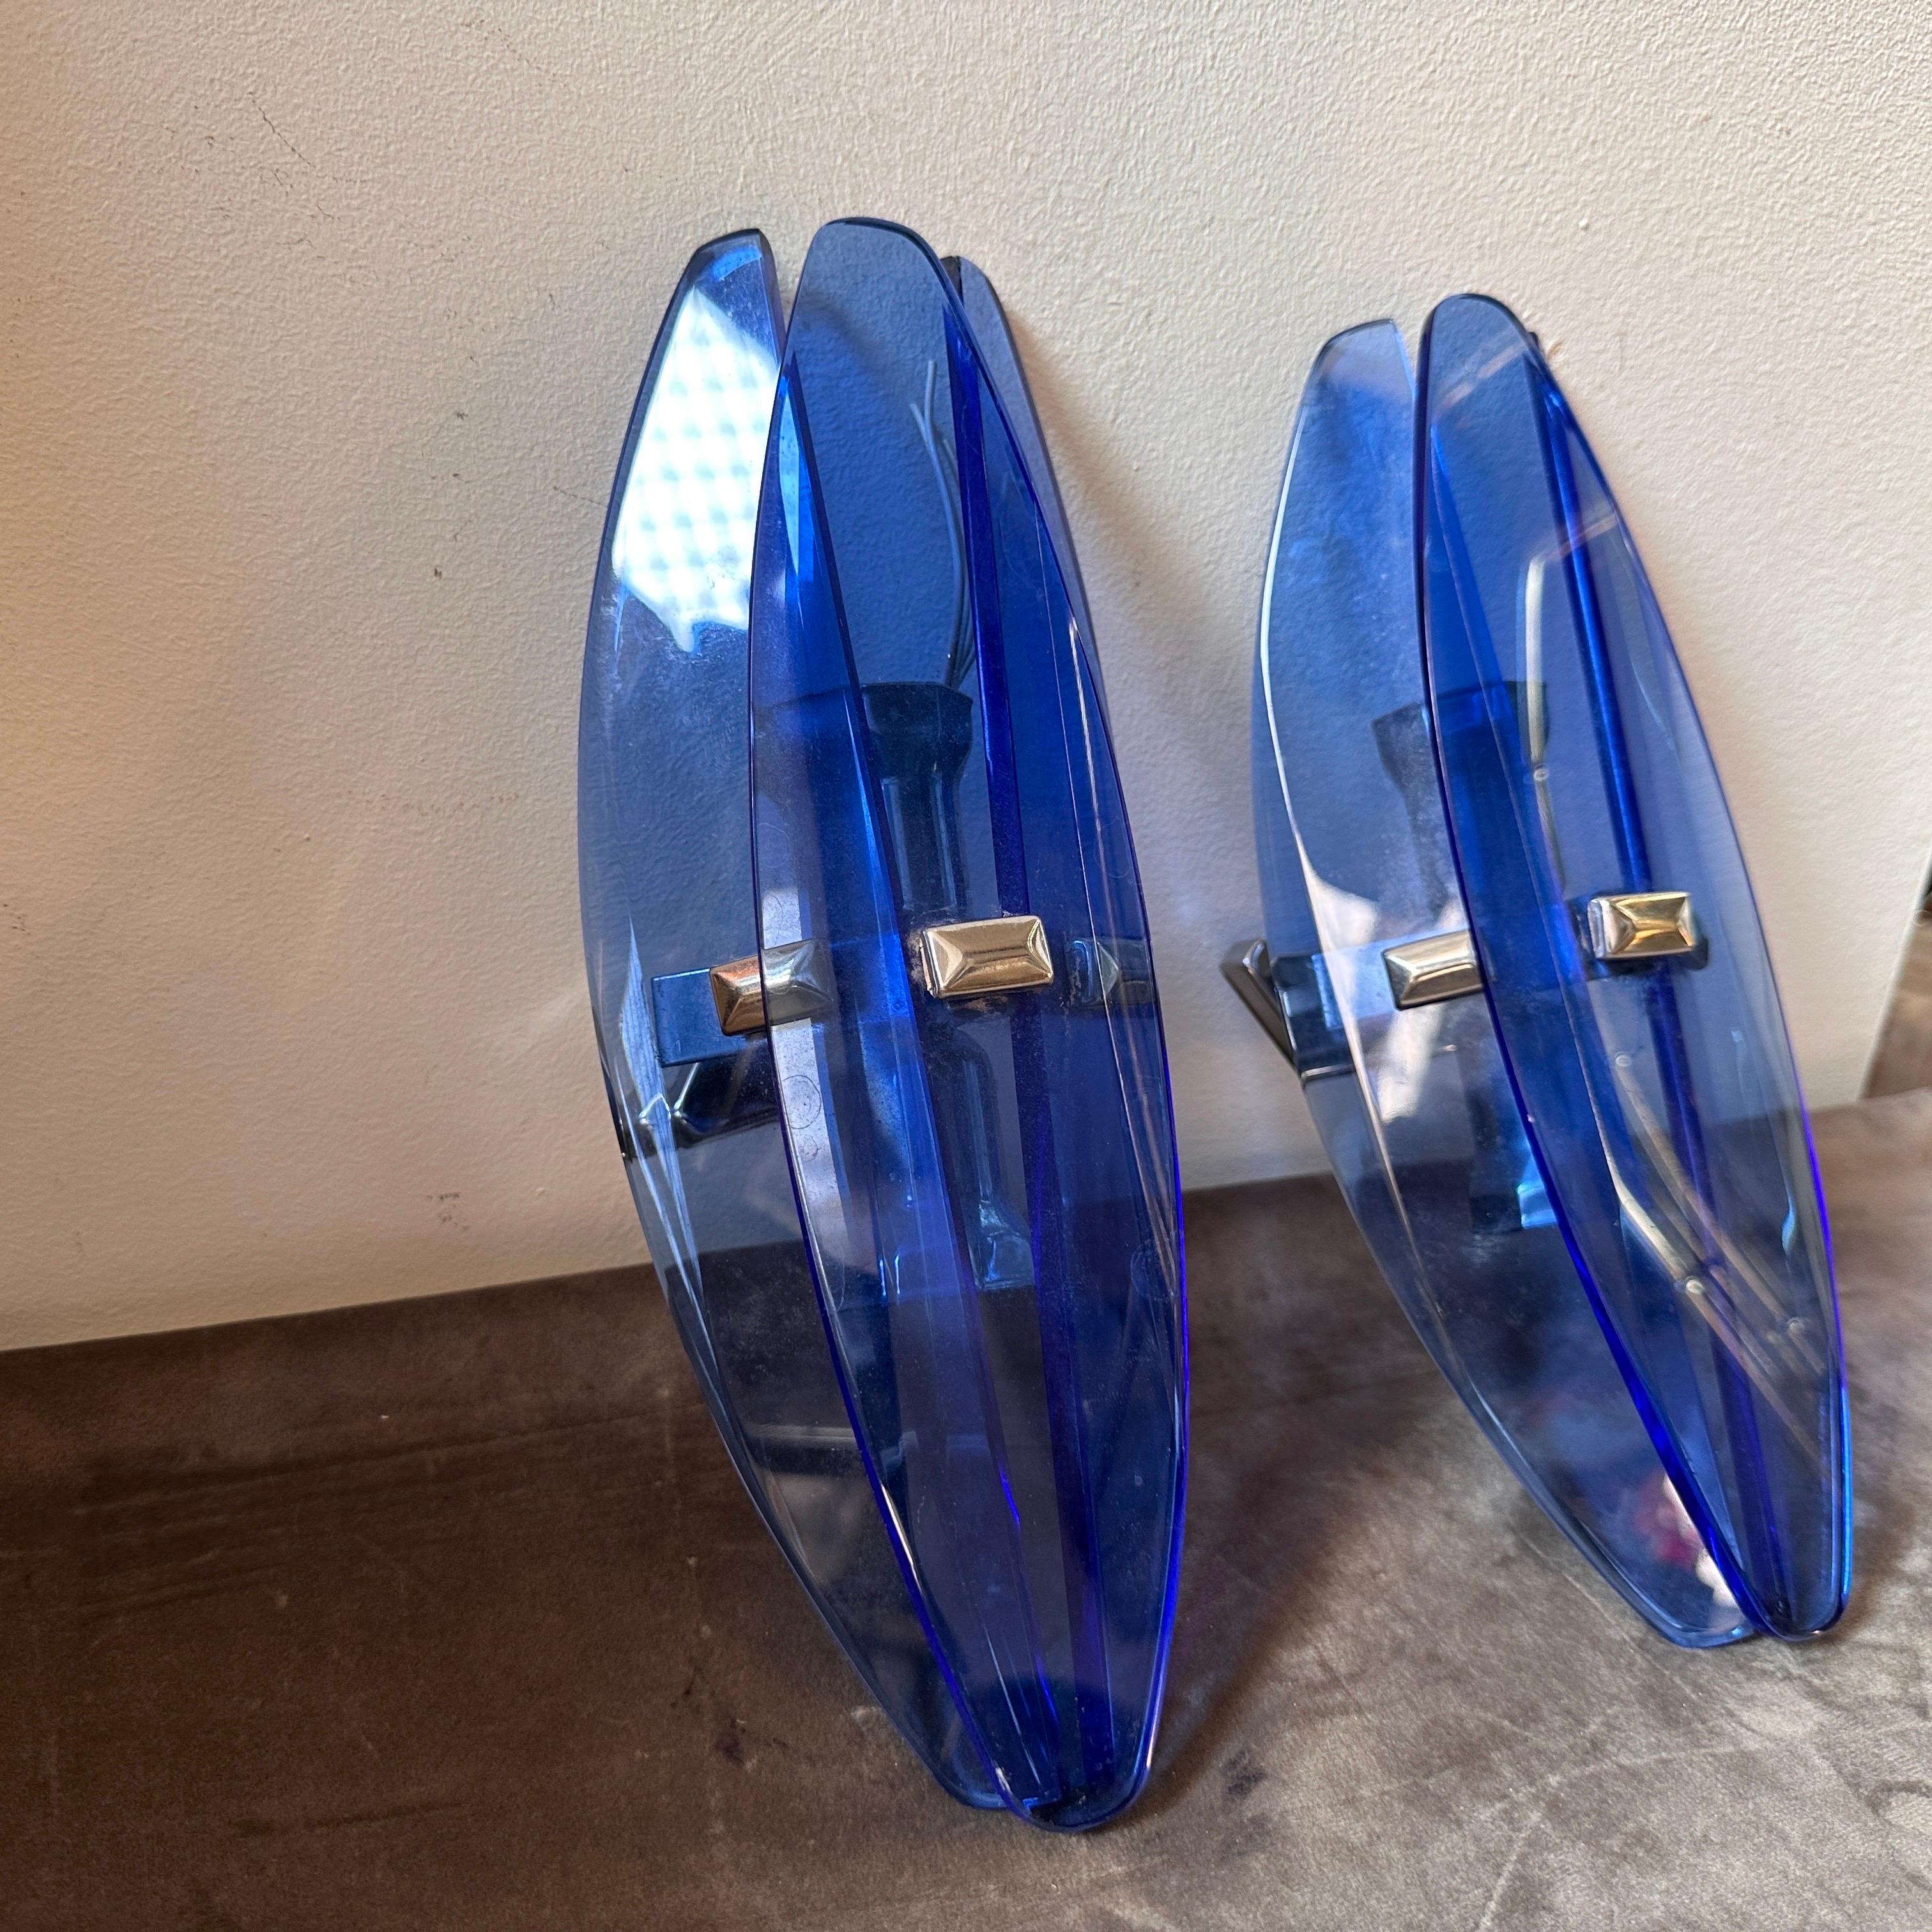 A set of two heavy blu glass wall sconces designed and manufactured in Italy in the Space Age Era by Veca, they are in working order, need two regular e14 bulbs each one. These Wall Sconces by Veca embody the futuristic and avant-garde design